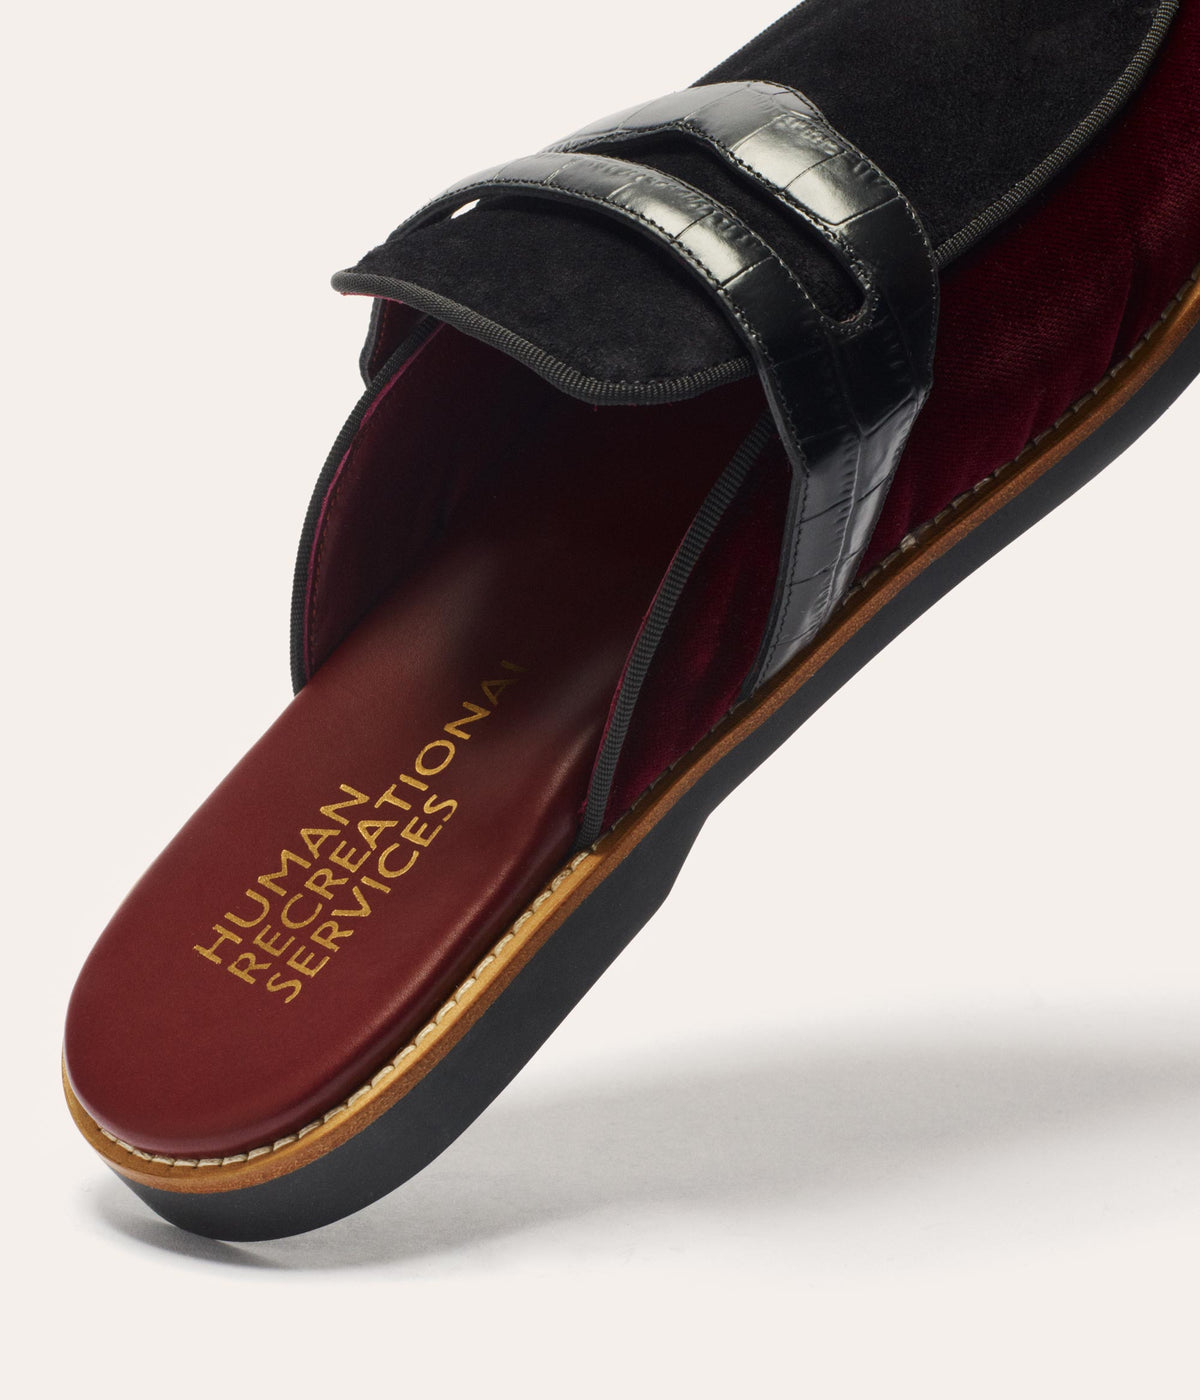 HUMAN RECREATIONAL SERVICES PALAZZO SLIPPER IN RED WINE AND BLACK MADE WITH ITALIAN CALF SKIN